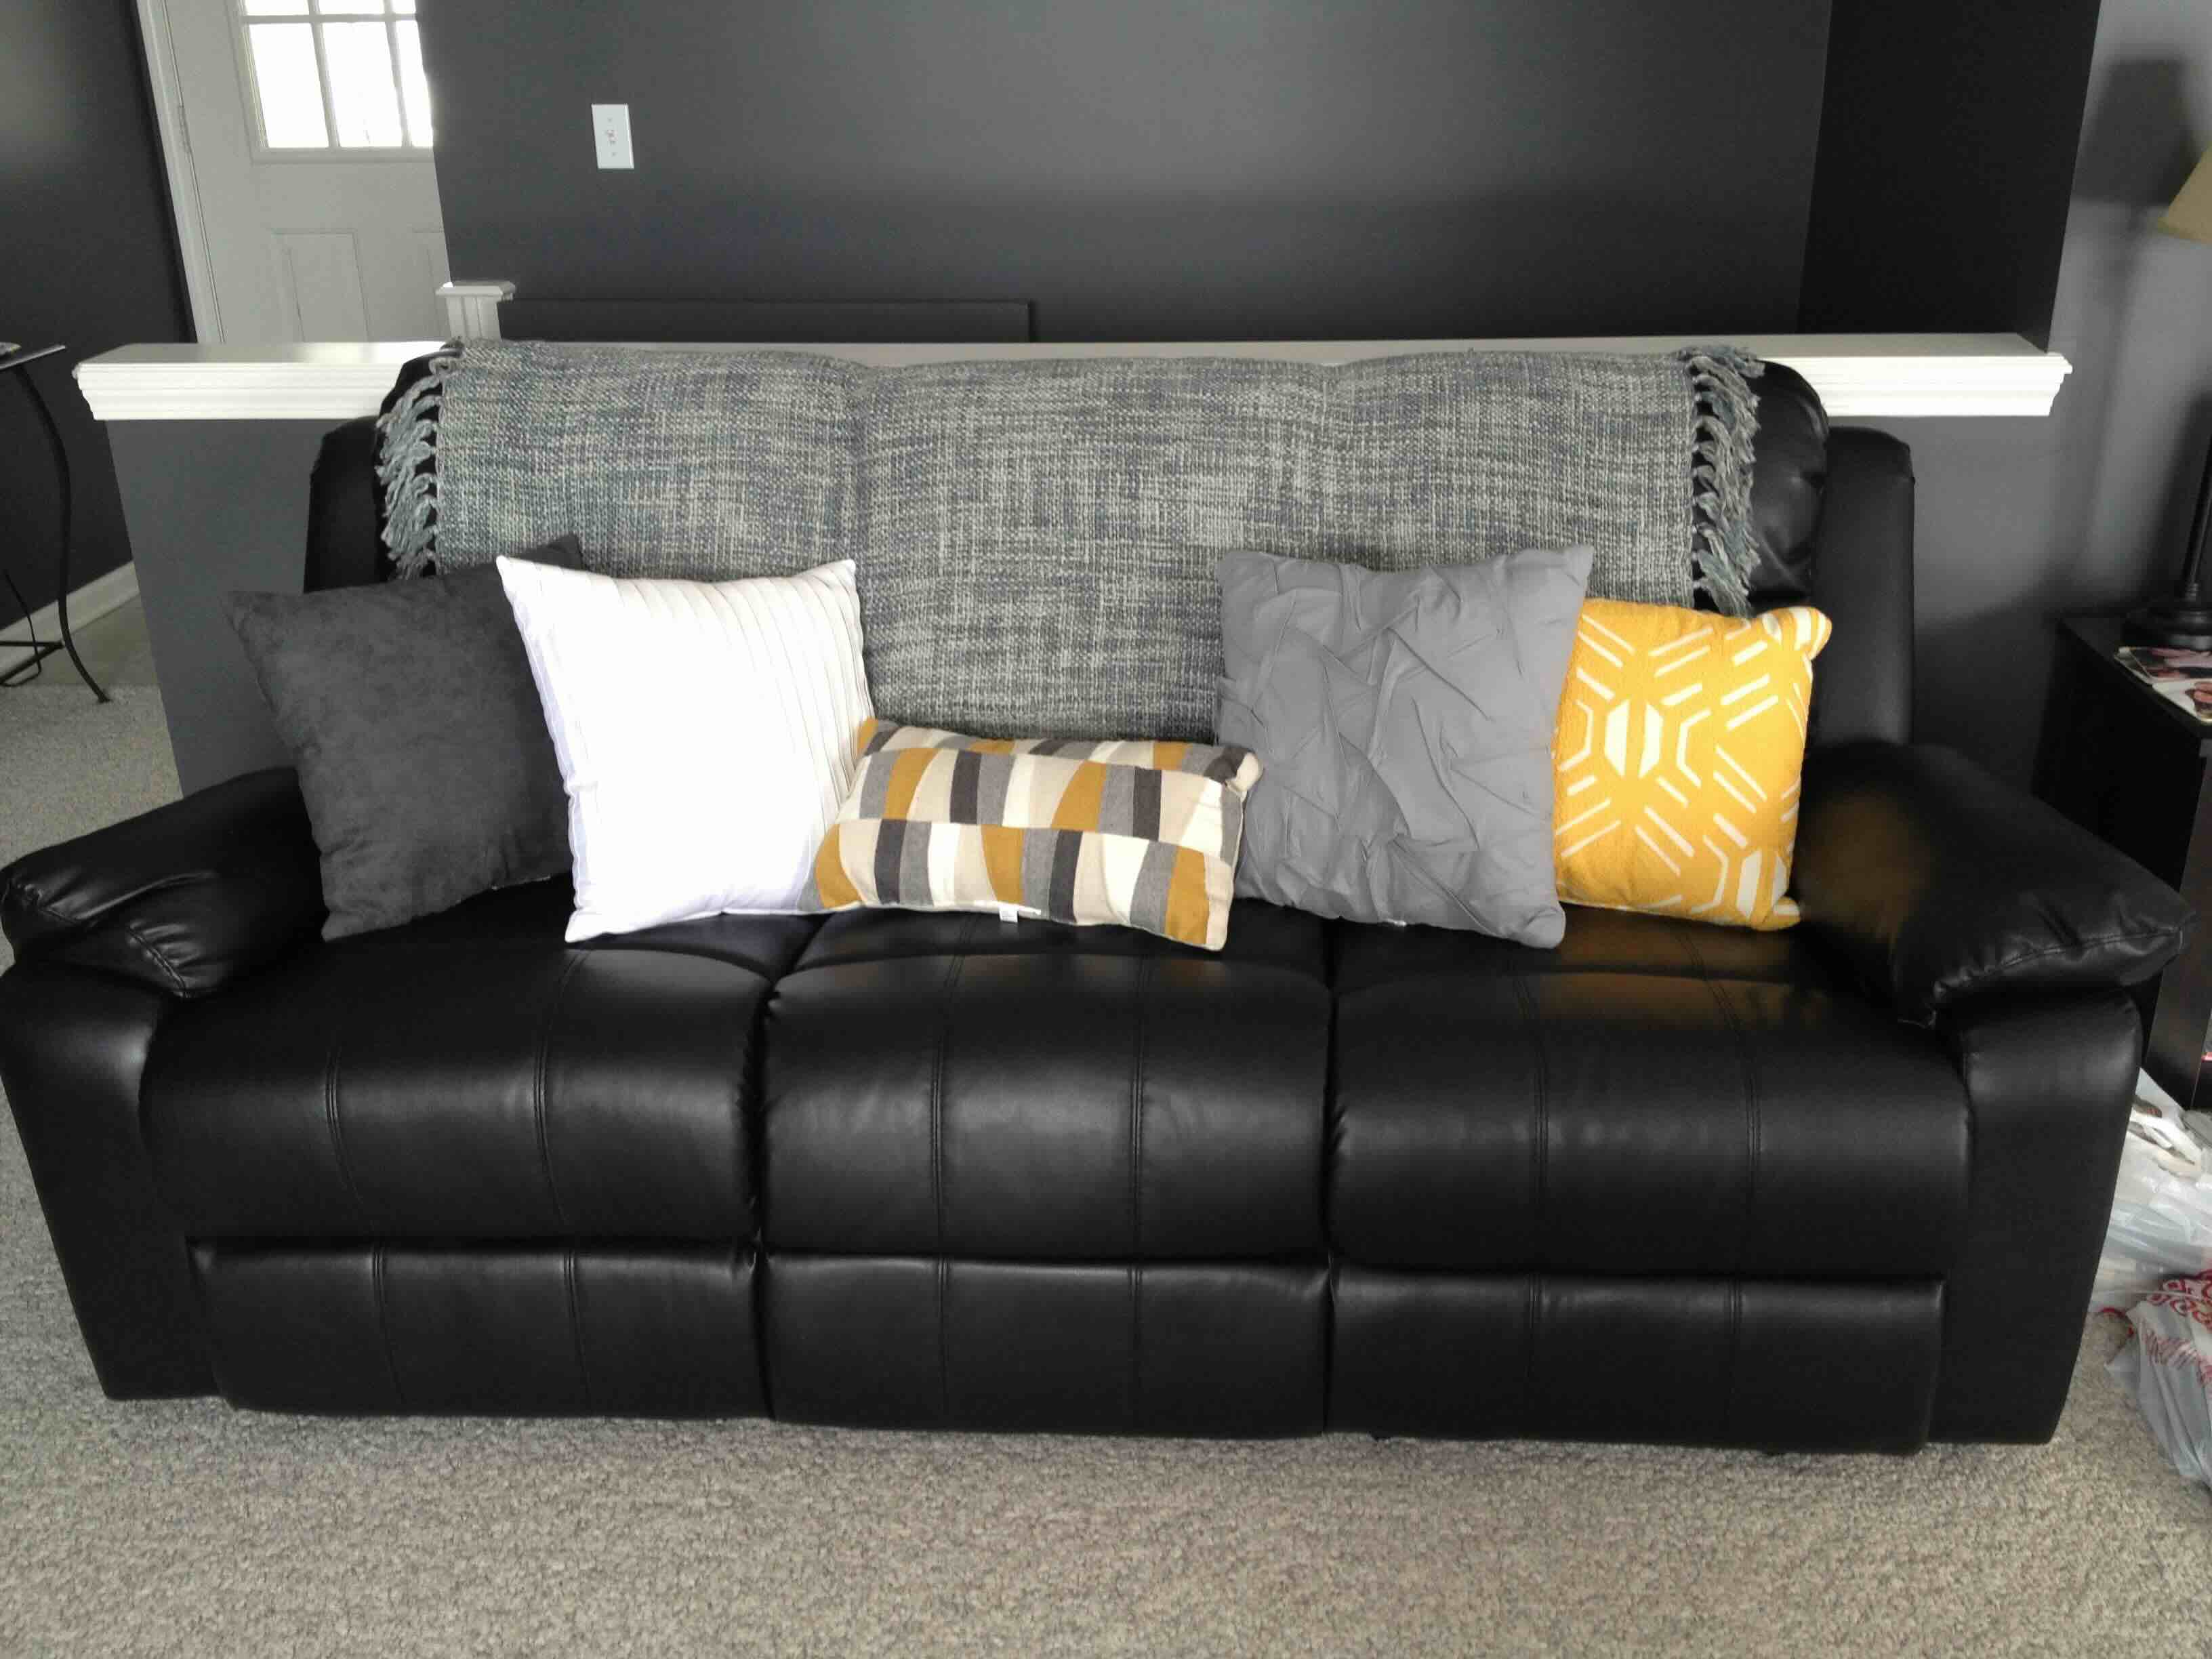 What Color Pillows For A Black Couch